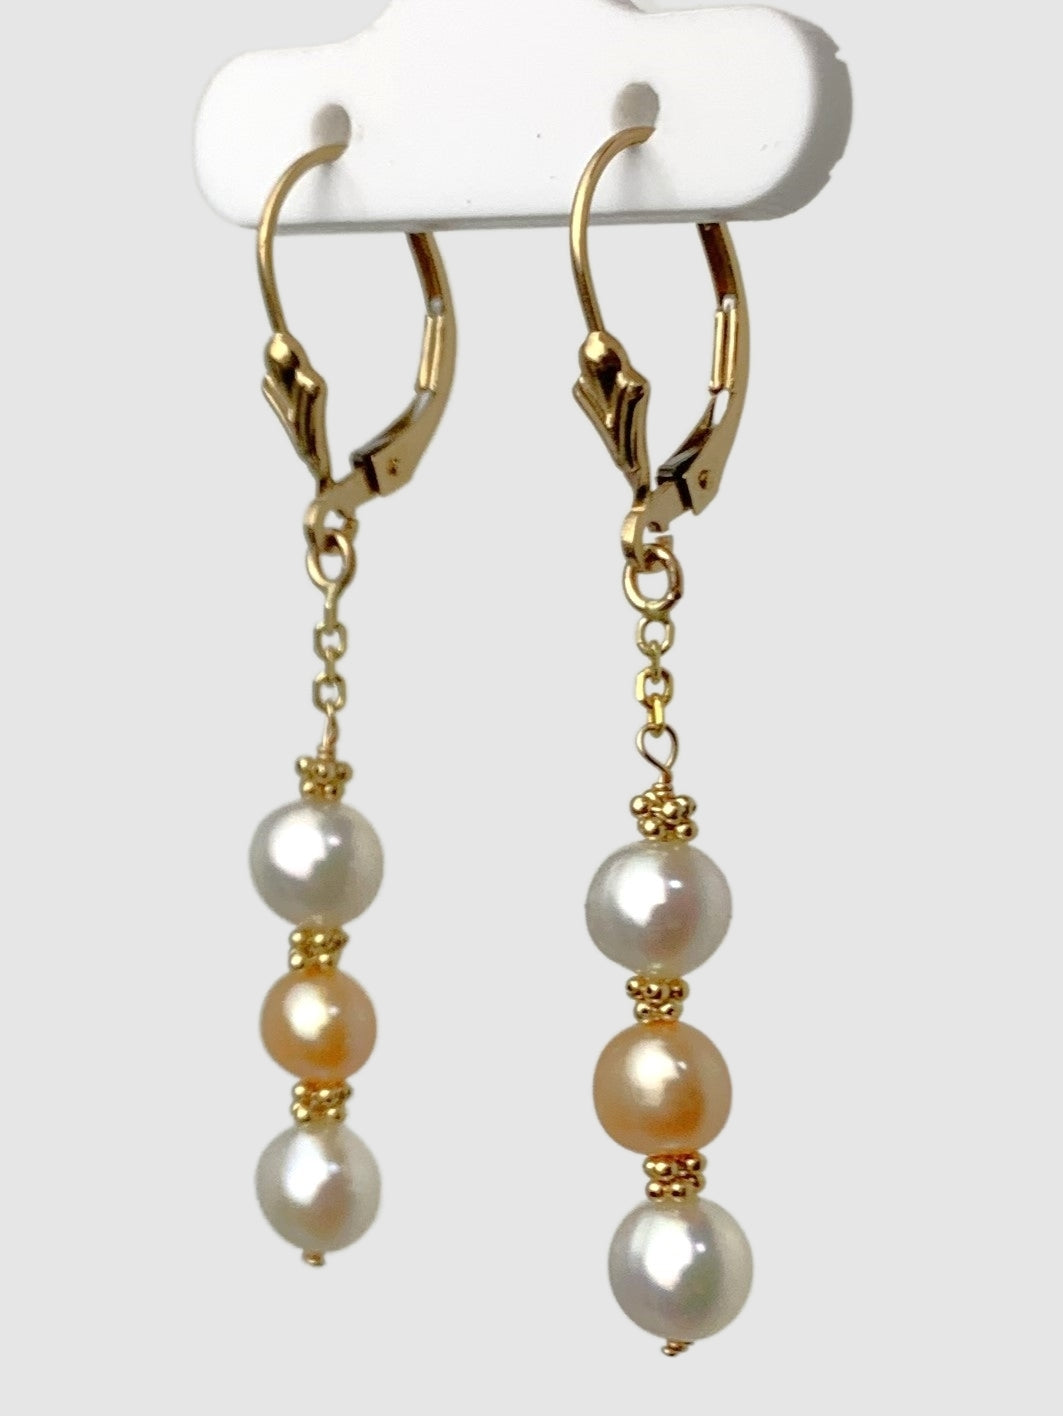 Clearance Sale! - Pearl and Rondelle Drop Earrings in 14KY - EAR-015-WIREPRL14Y-M2